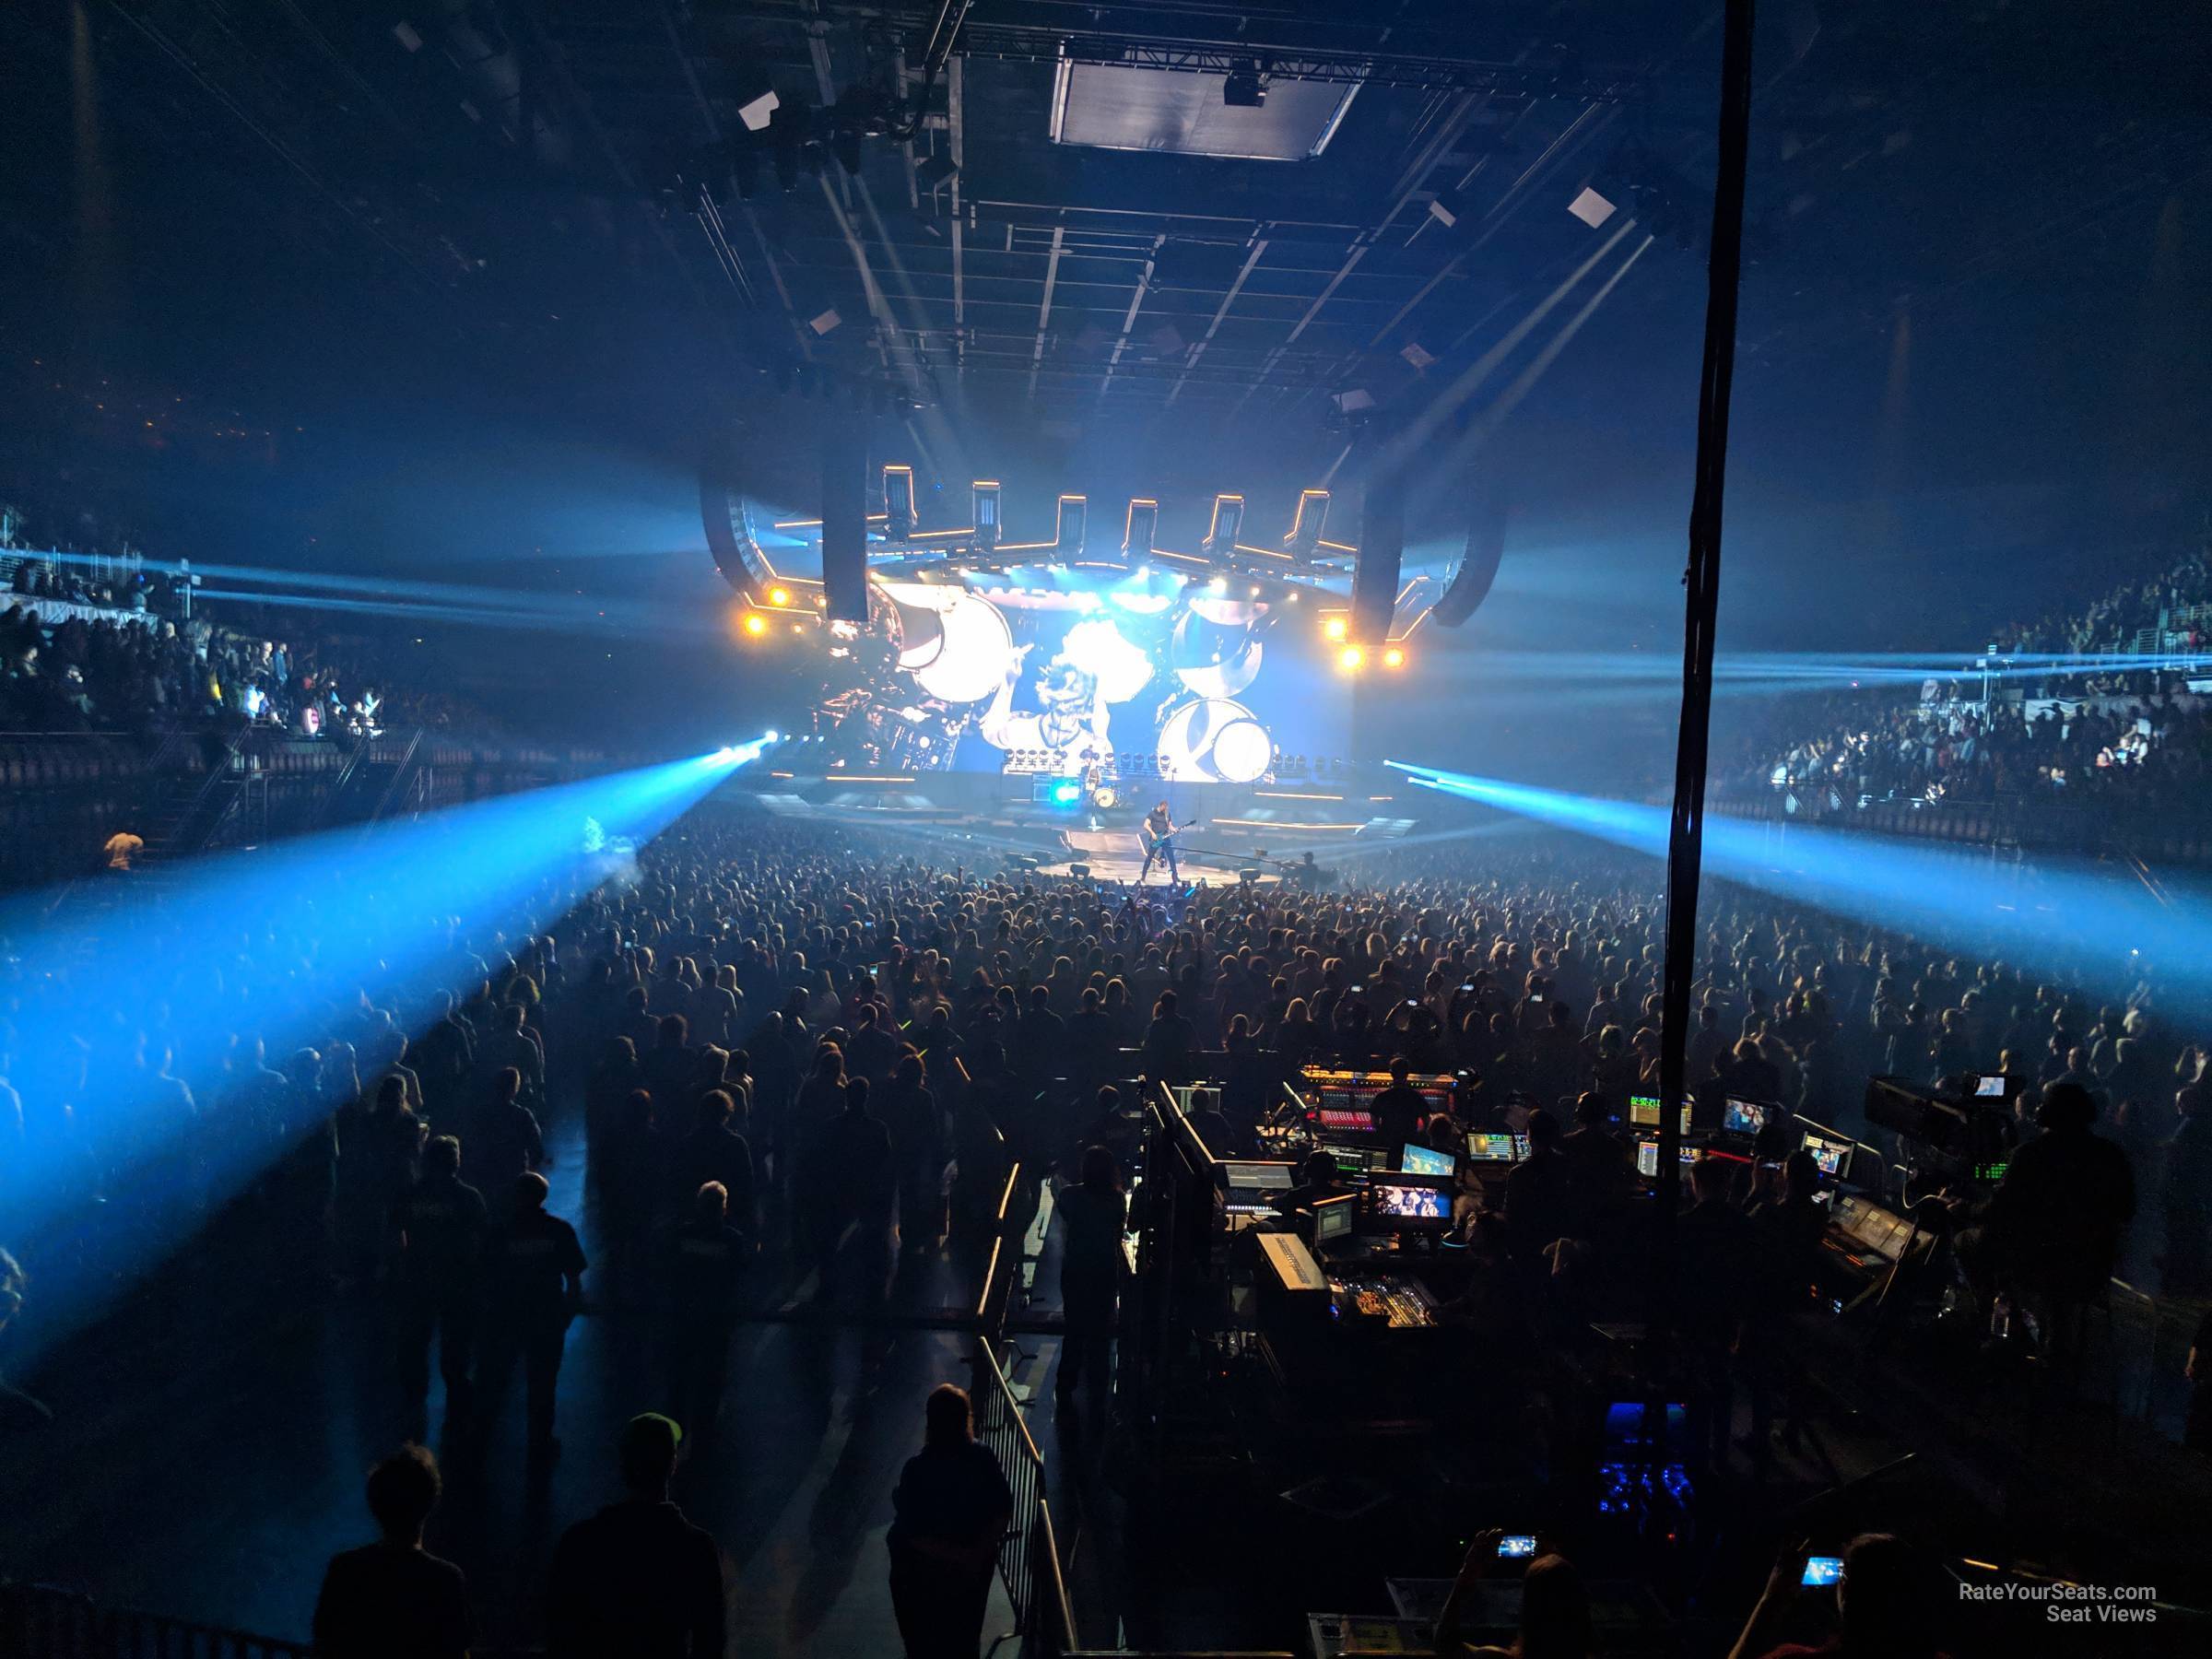 head-on concert view at Michelob ULTRA Arena